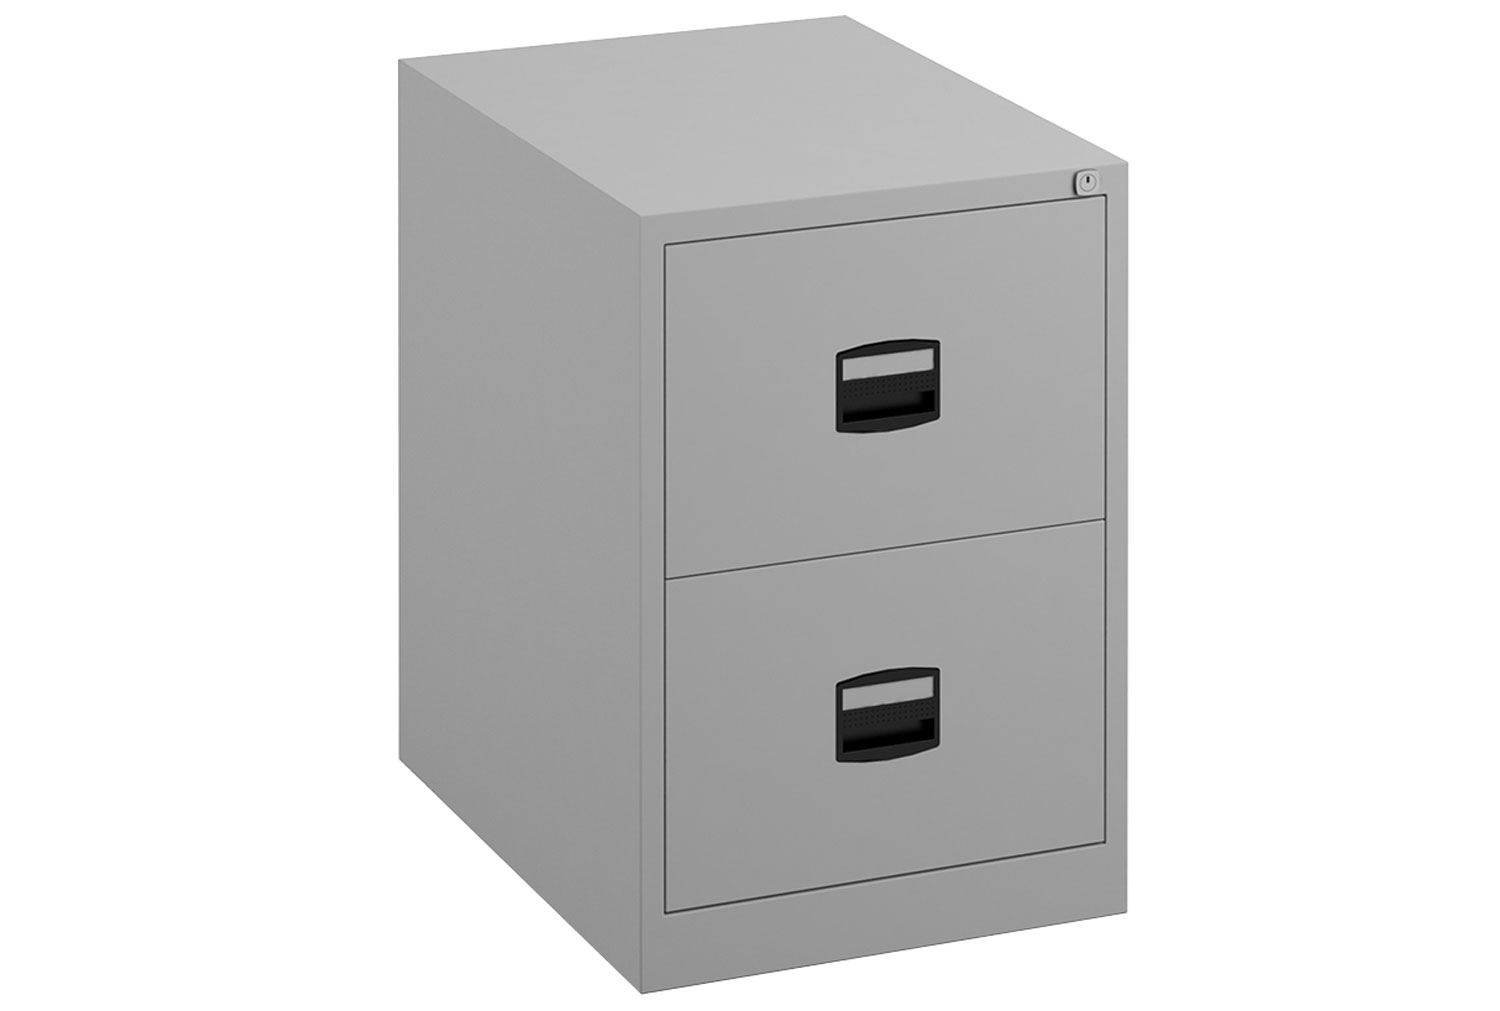 Bisley Economy Office Filing Cabinet (Central Handle), 2 Drawer - 47wx62dx71h (cm), Grey, Express Delivery